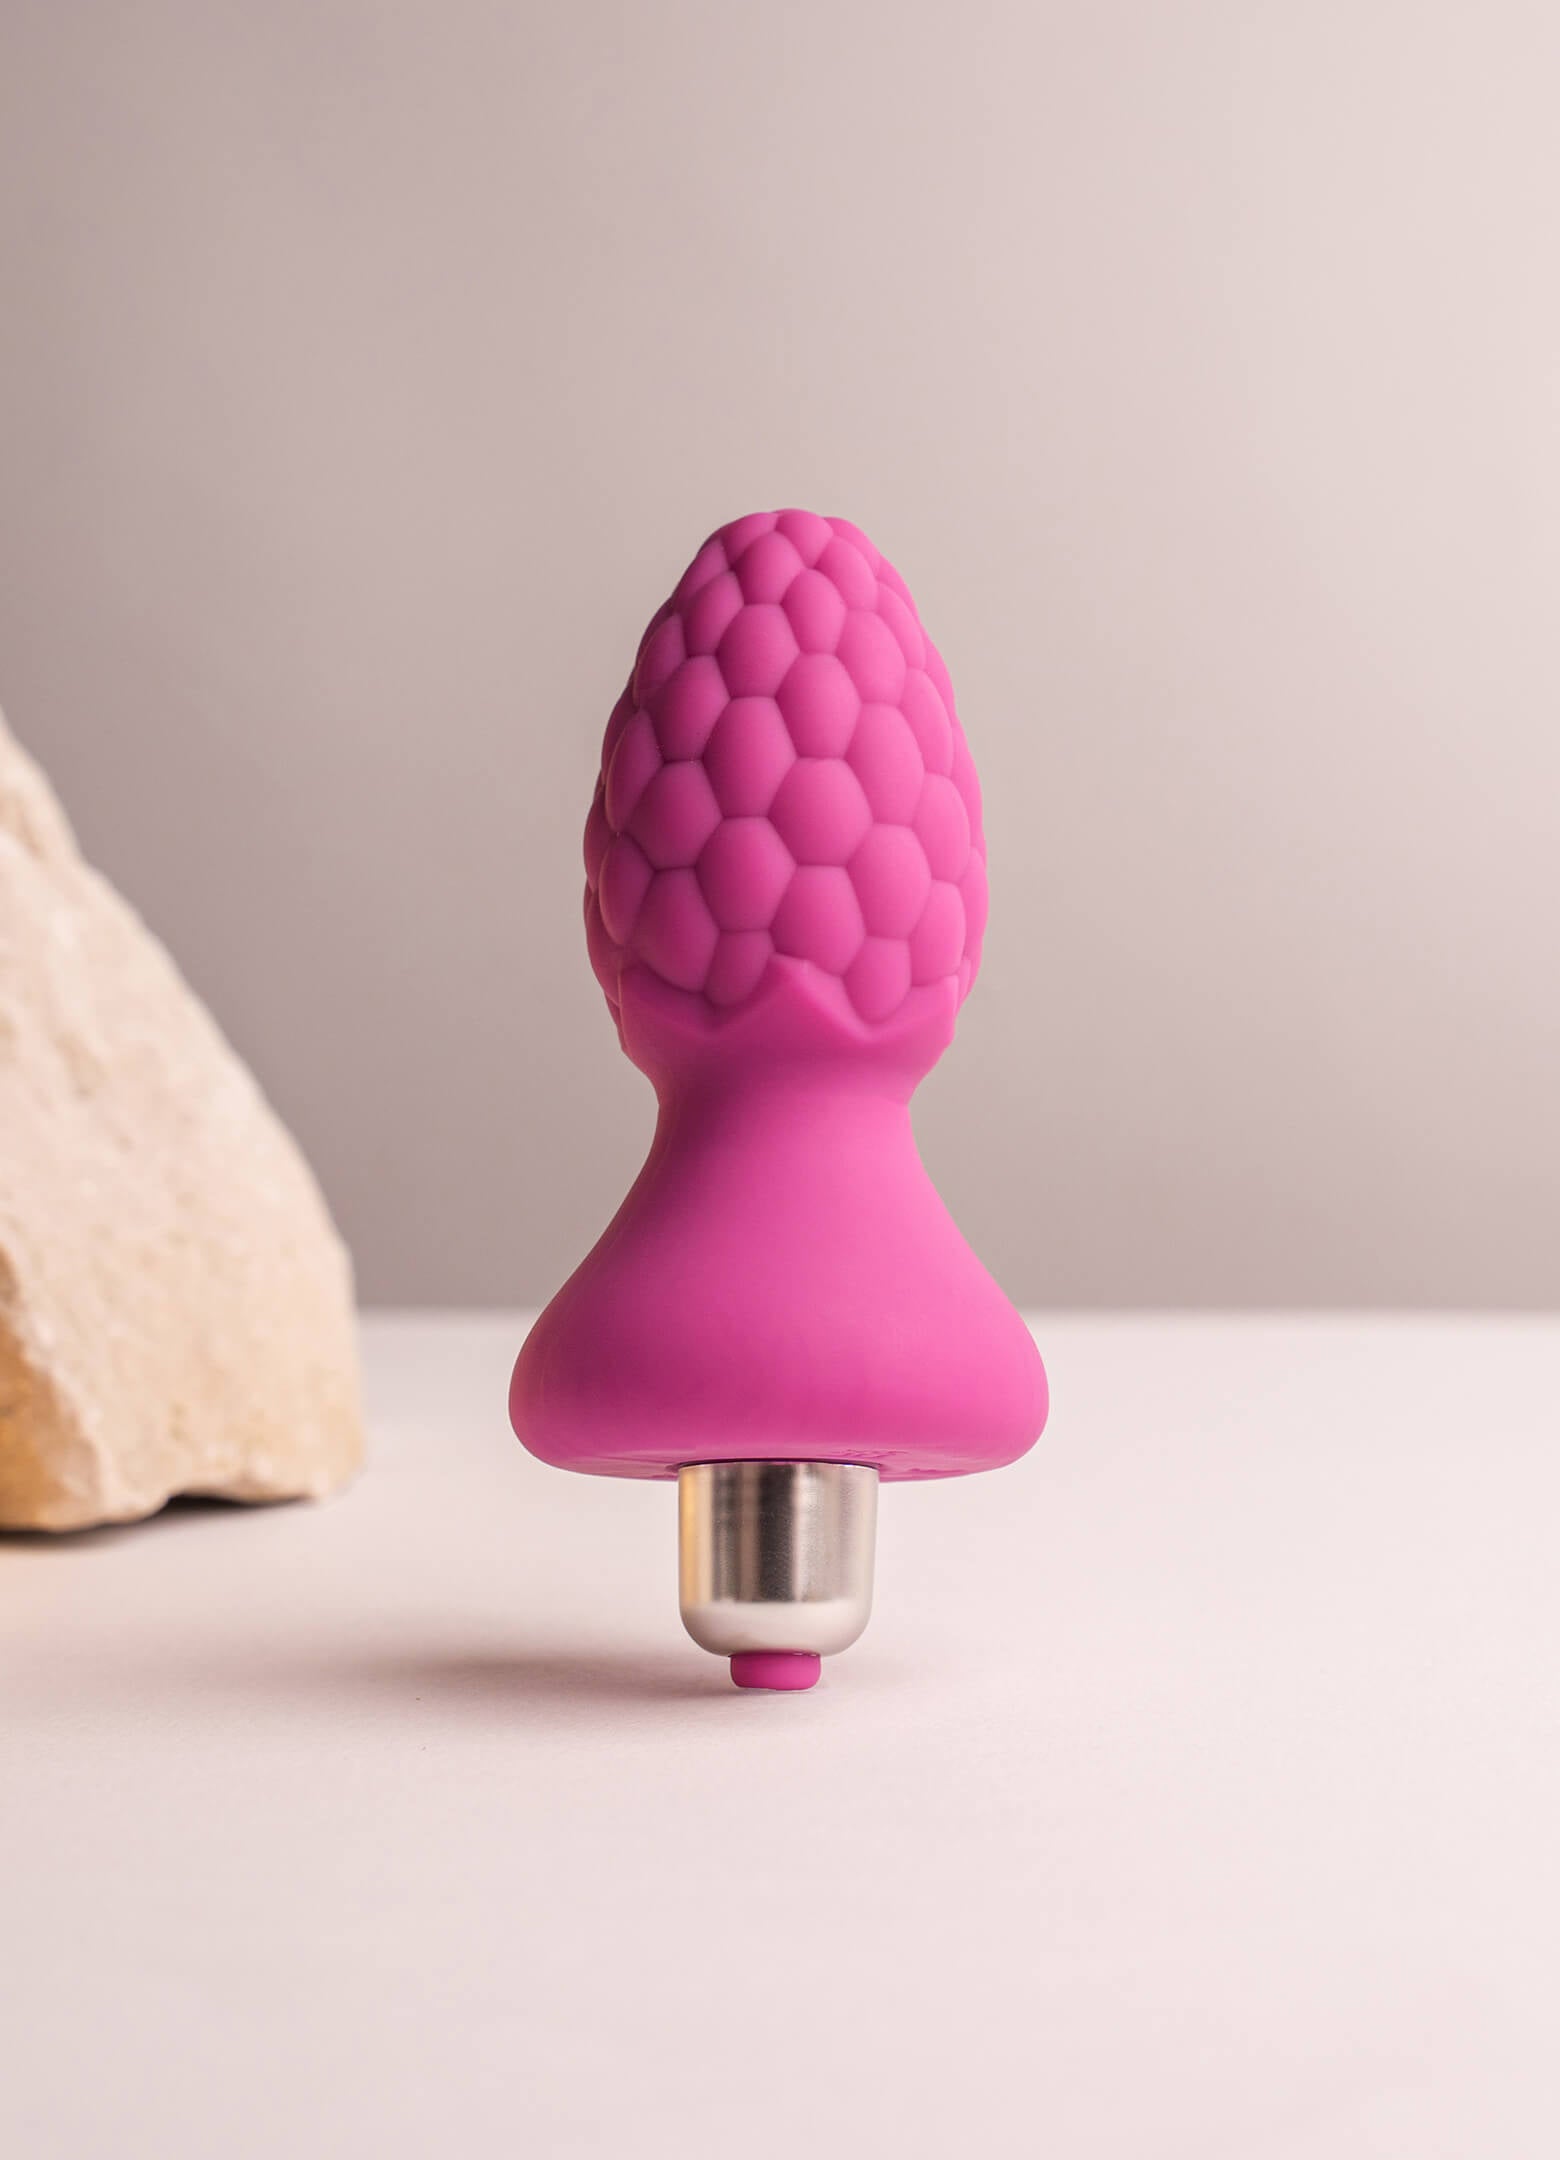 Pink butt plug with raspberry pattern texture housing a removeable bullet vibrator.